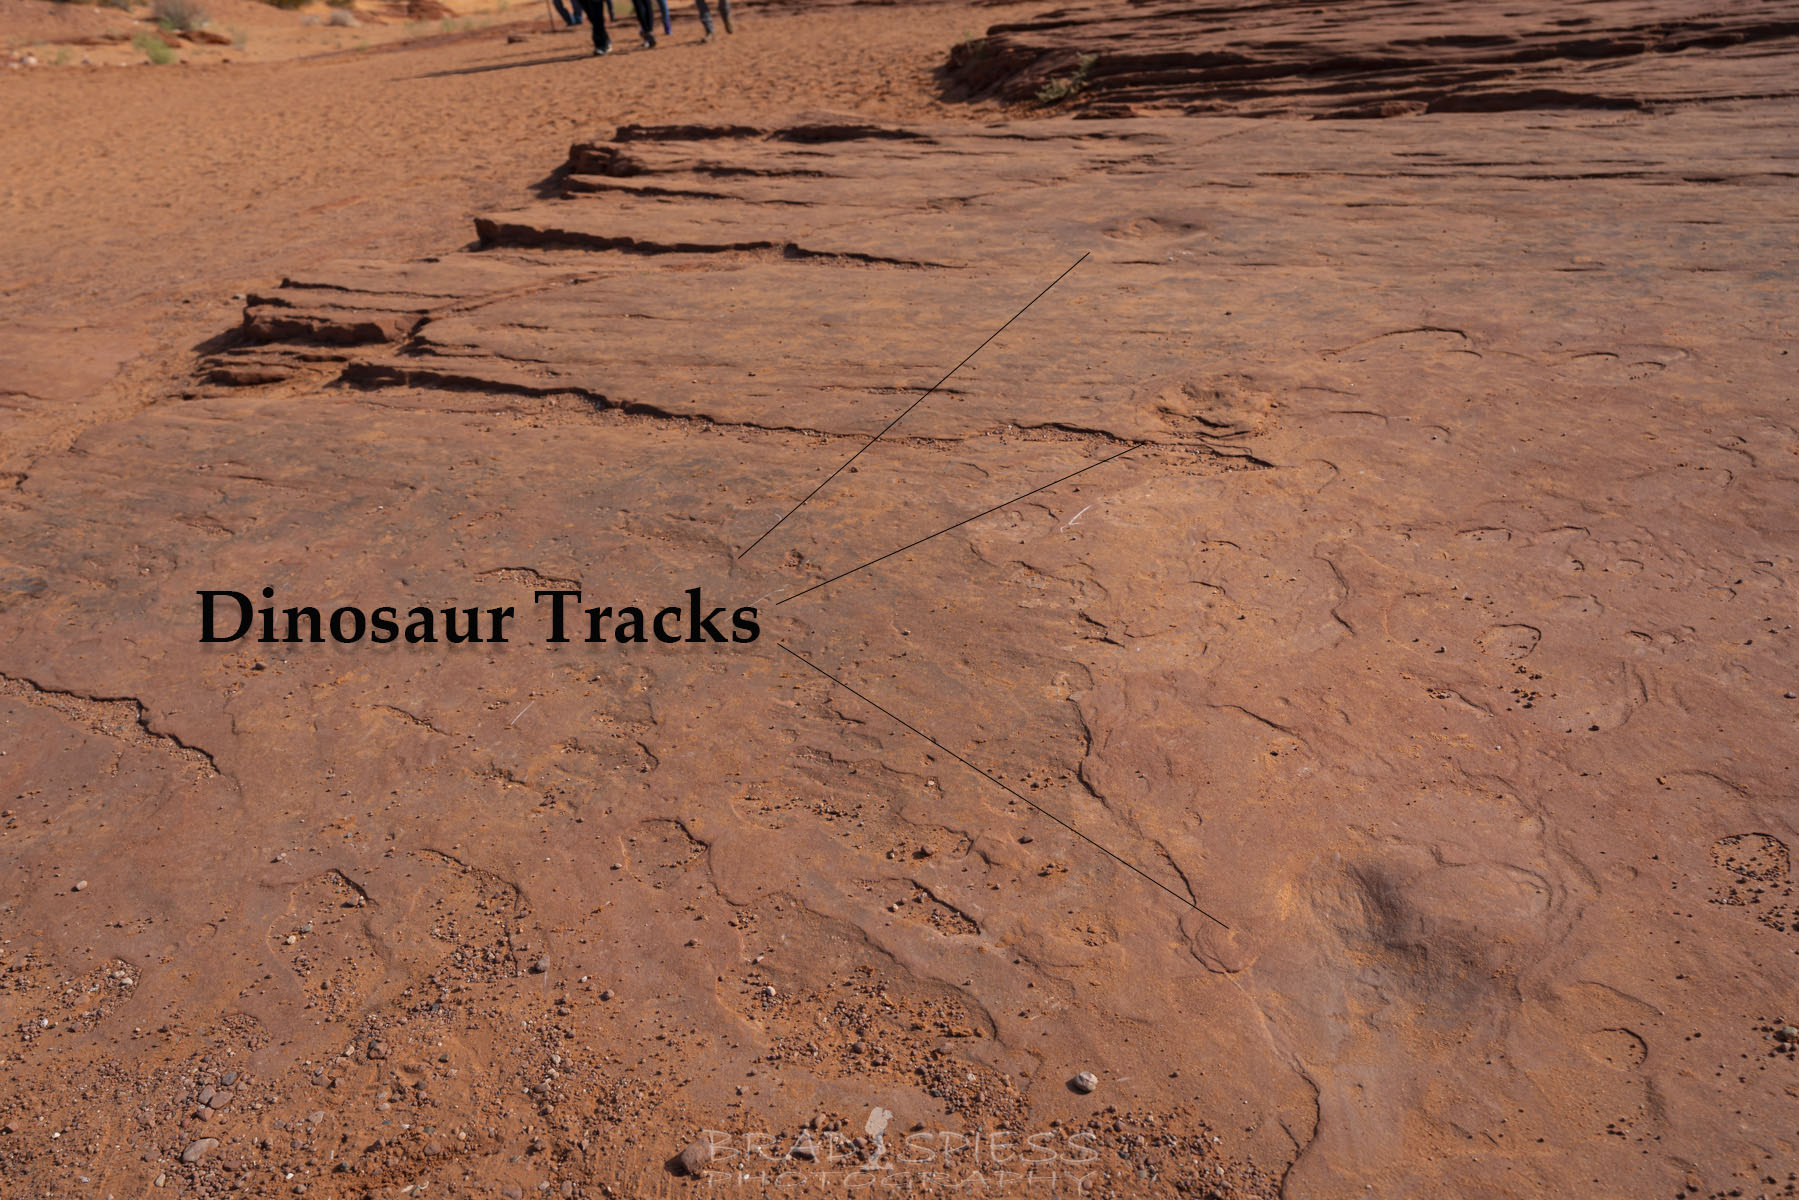 Dinosaur tracks you will see when exiting Lower Antelope Canyon